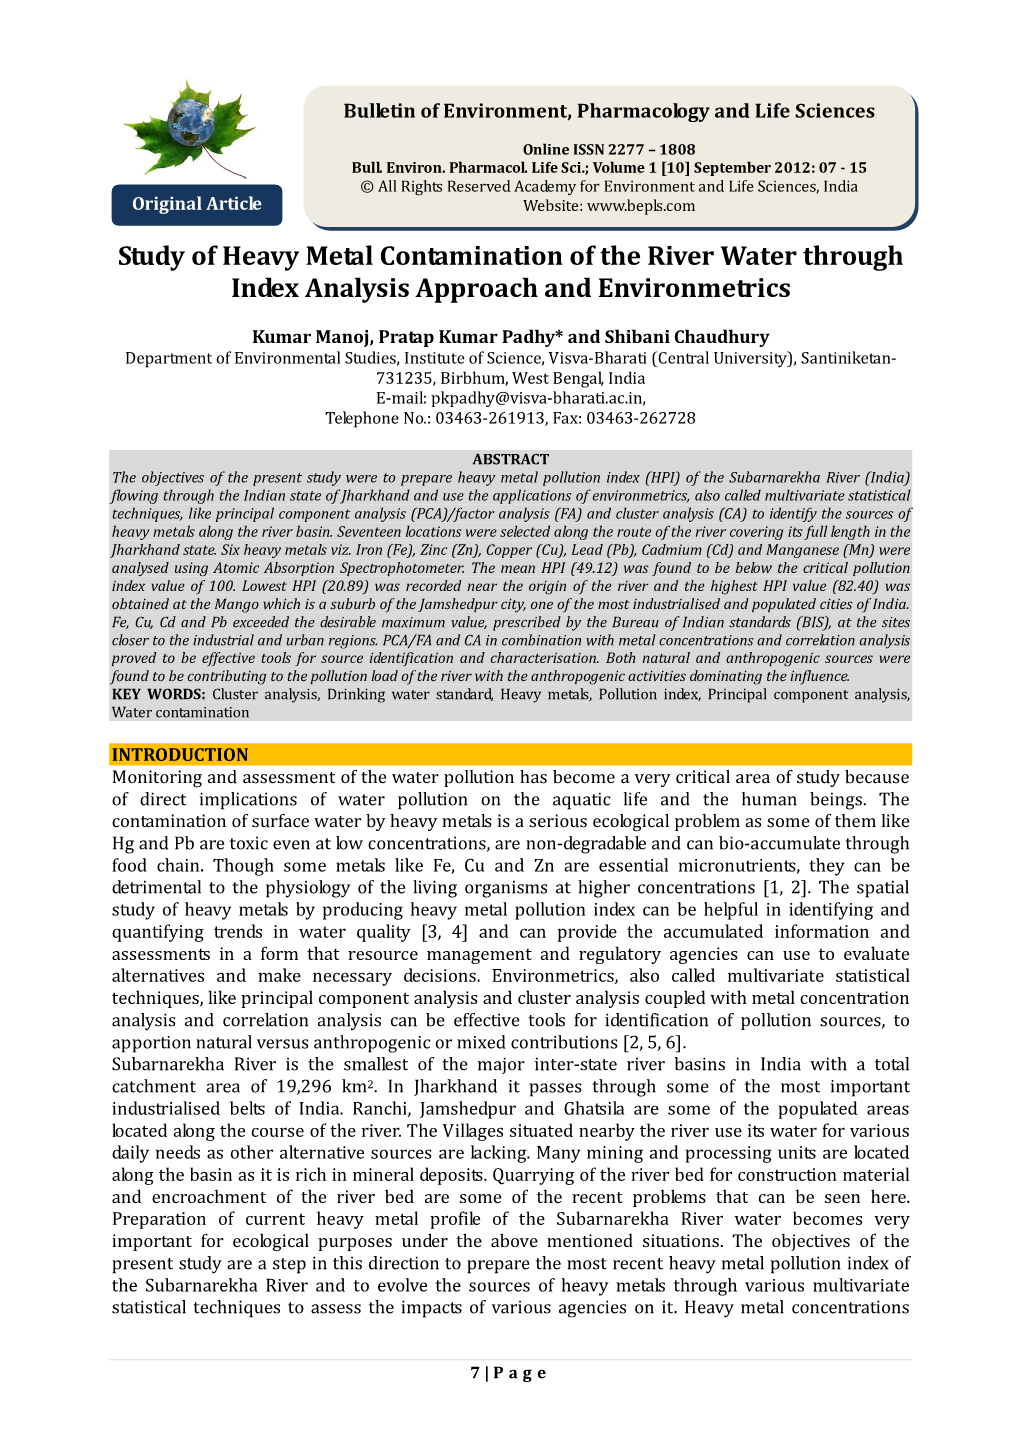 Study of Heavy Metal Contamination of the River Water Through Index Analysis Approach and Environmetrics